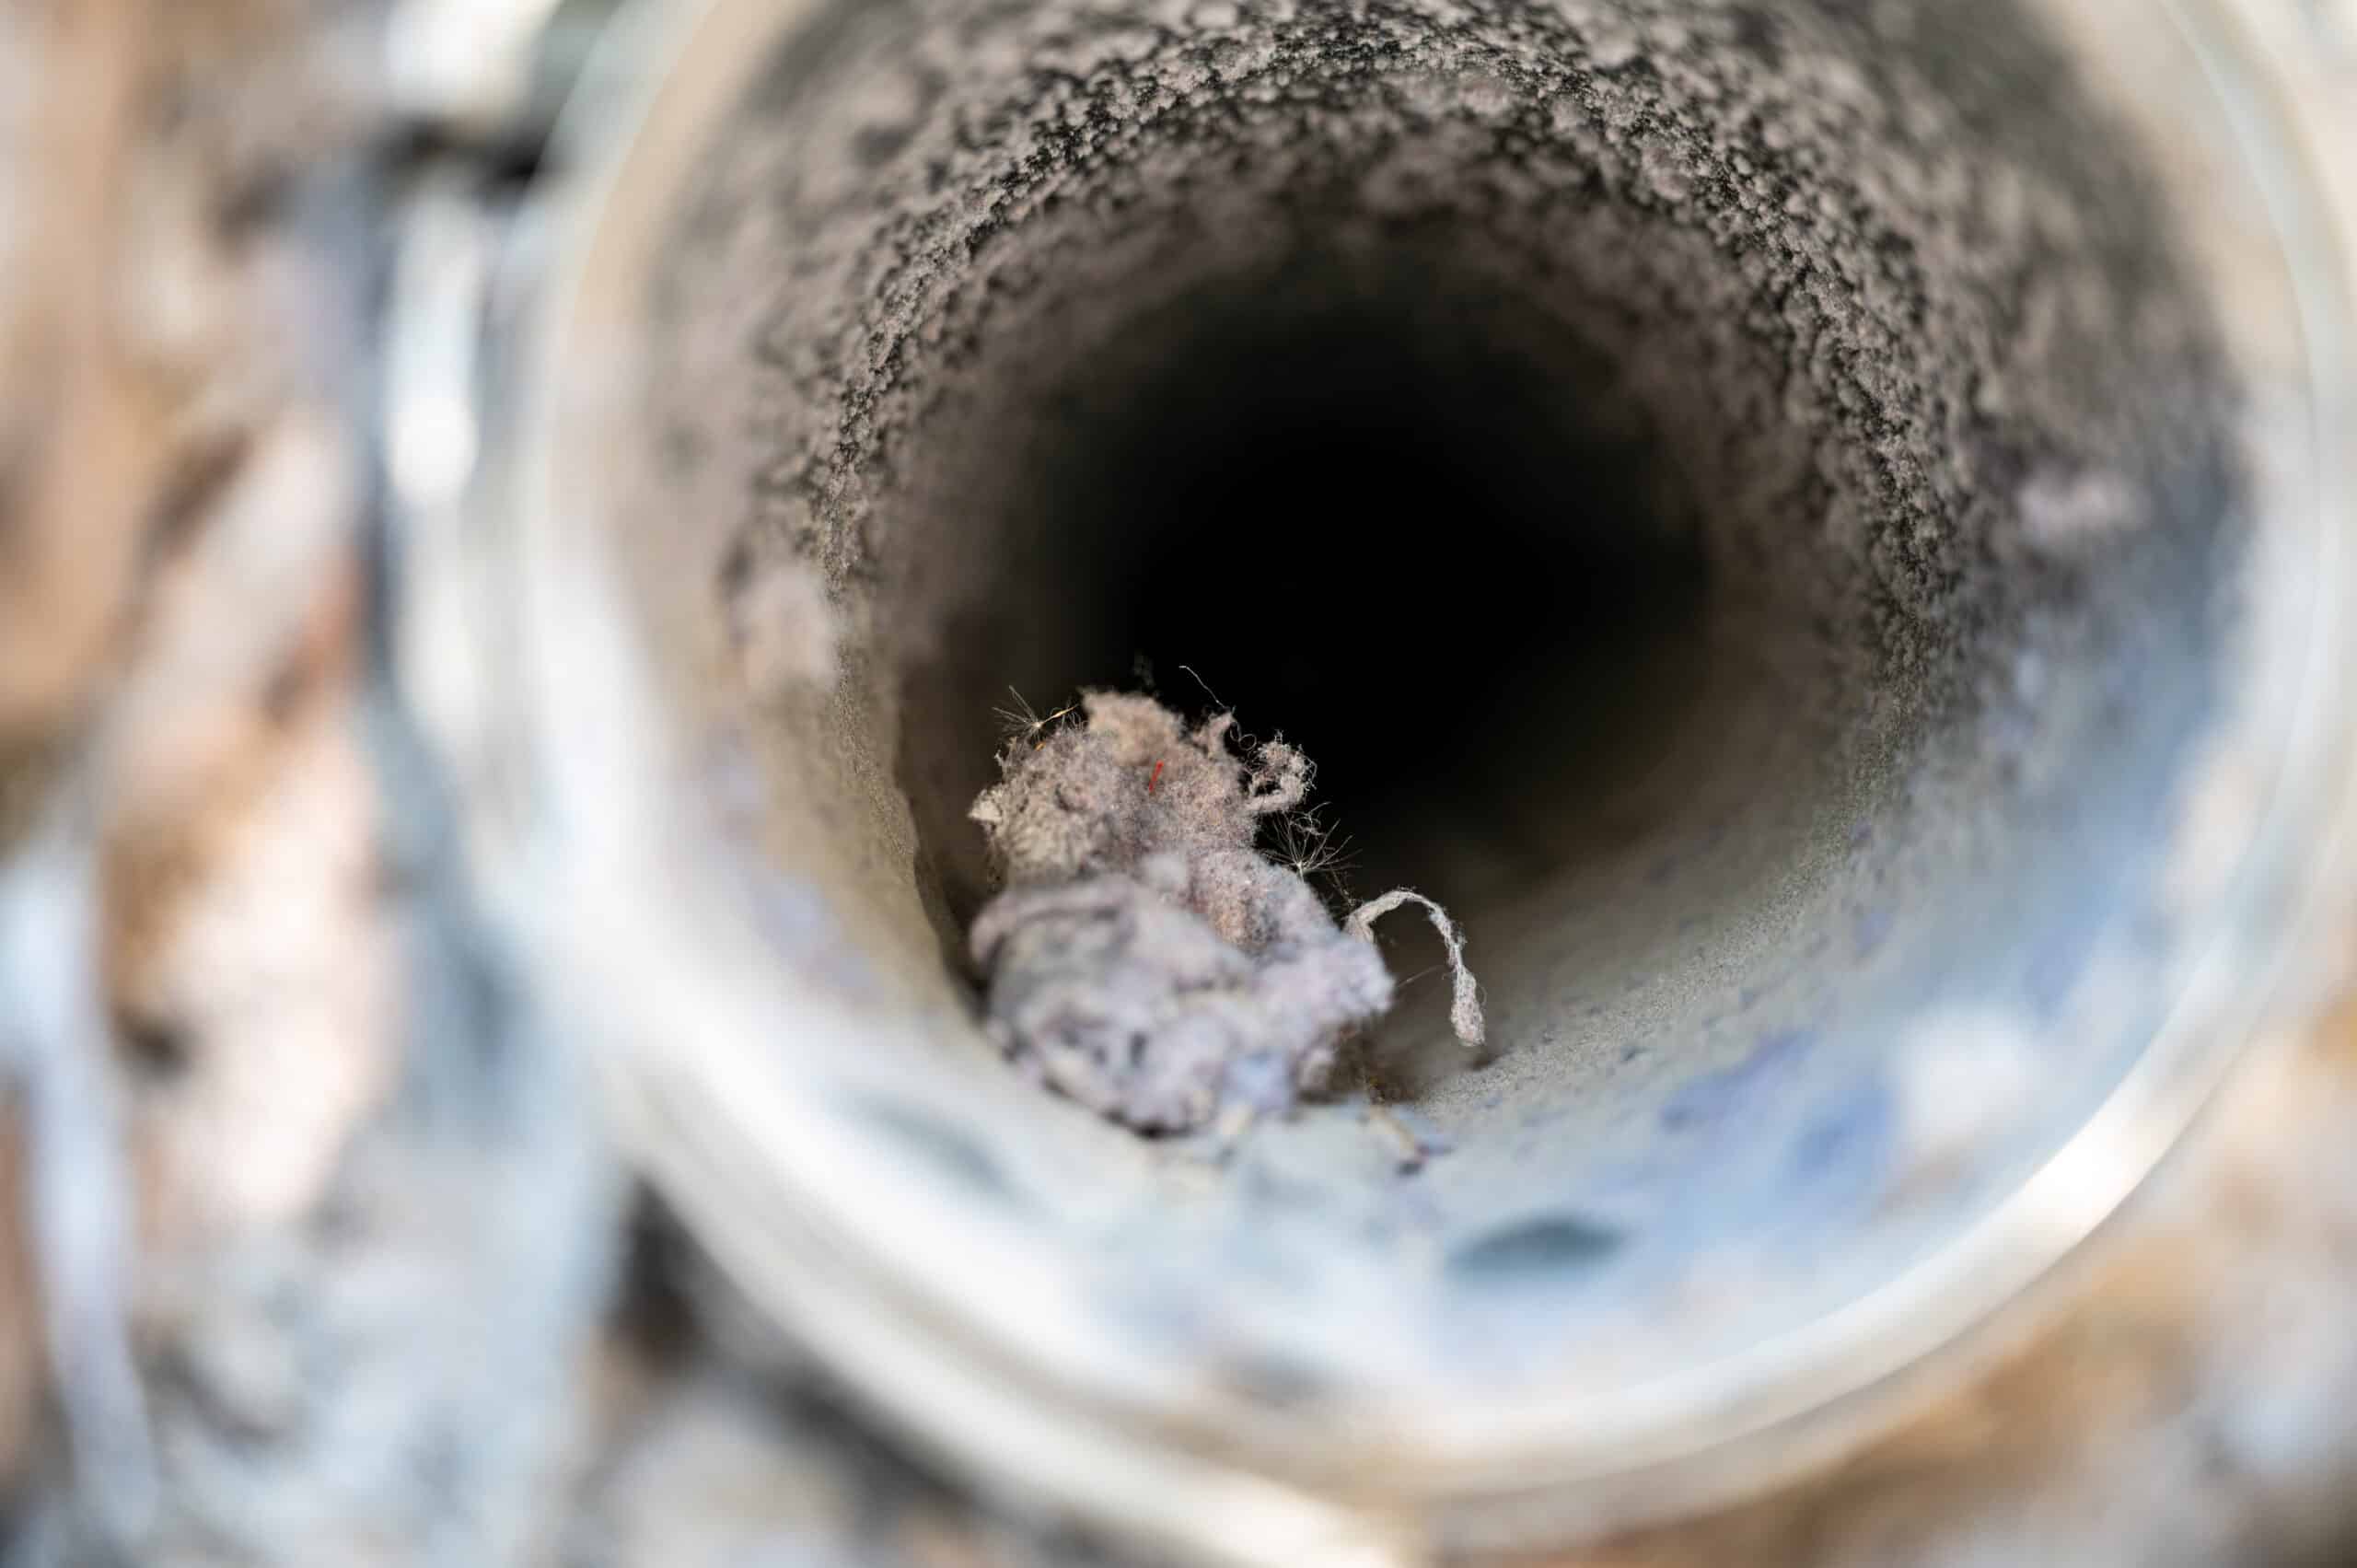 Dryer vent cleaning boise id